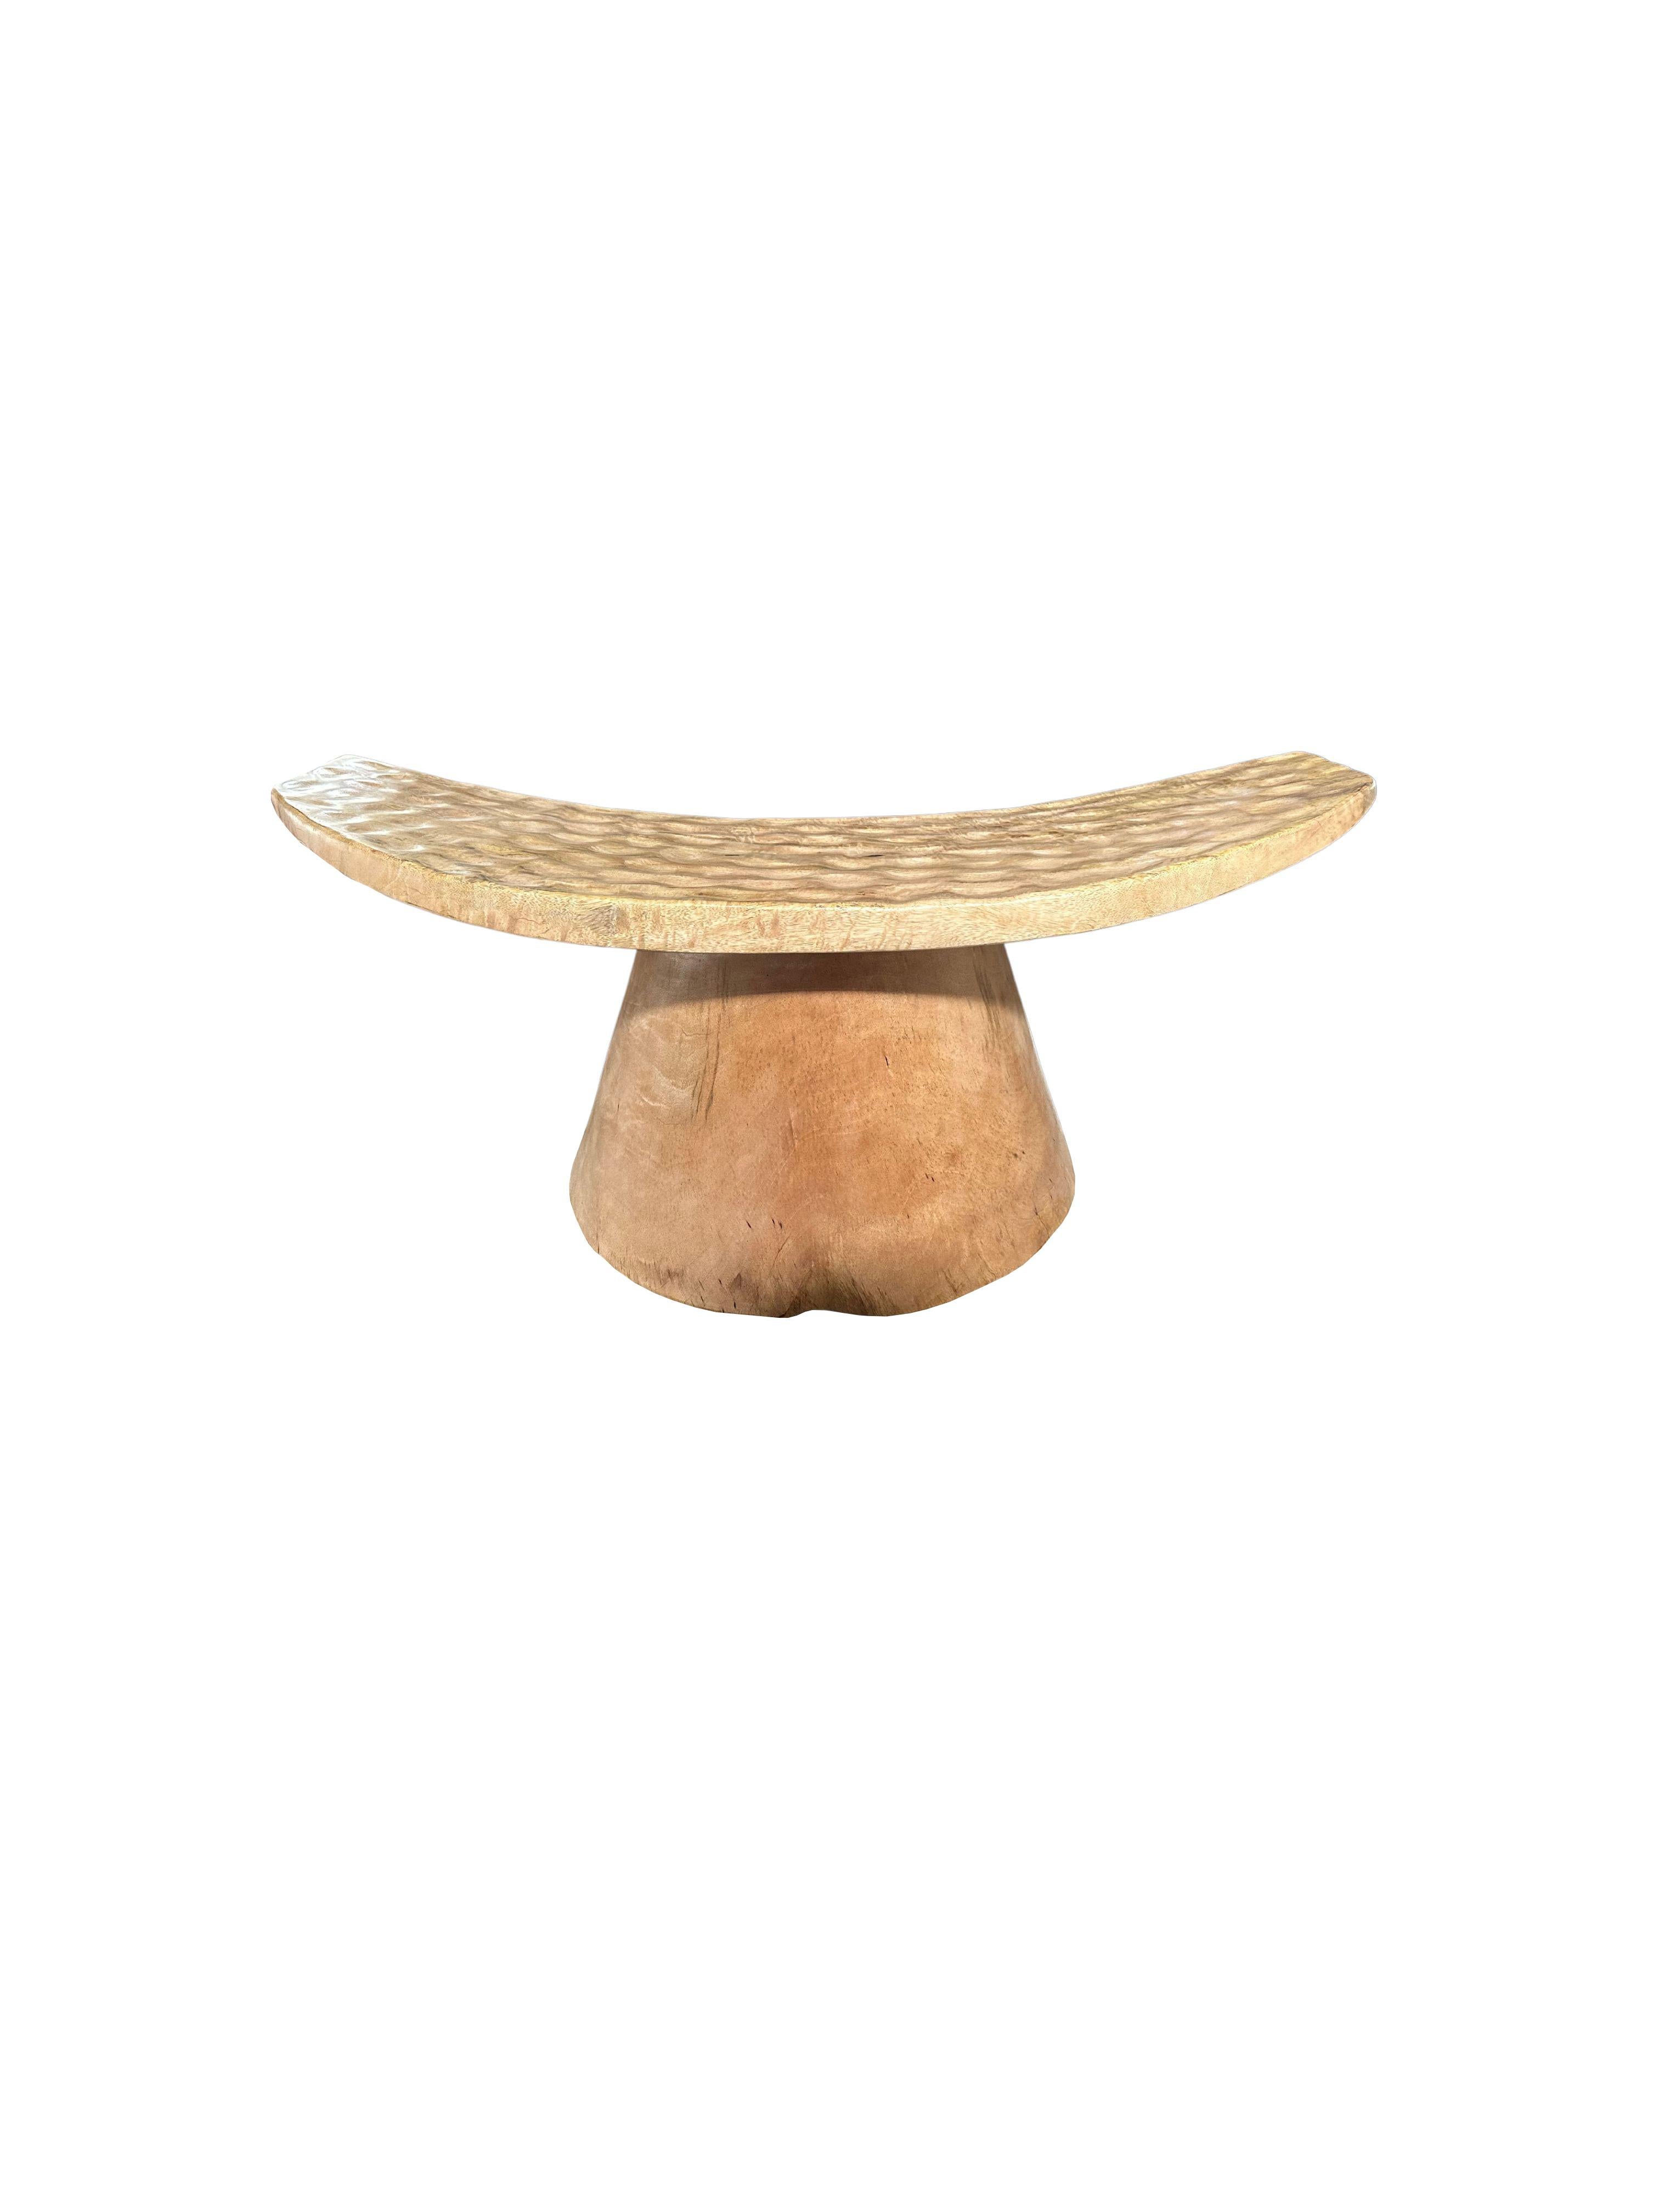 Contemporary Sculptural Stool with Curved Seat & Hand Hewn Detailing, Natural Finish For Sale